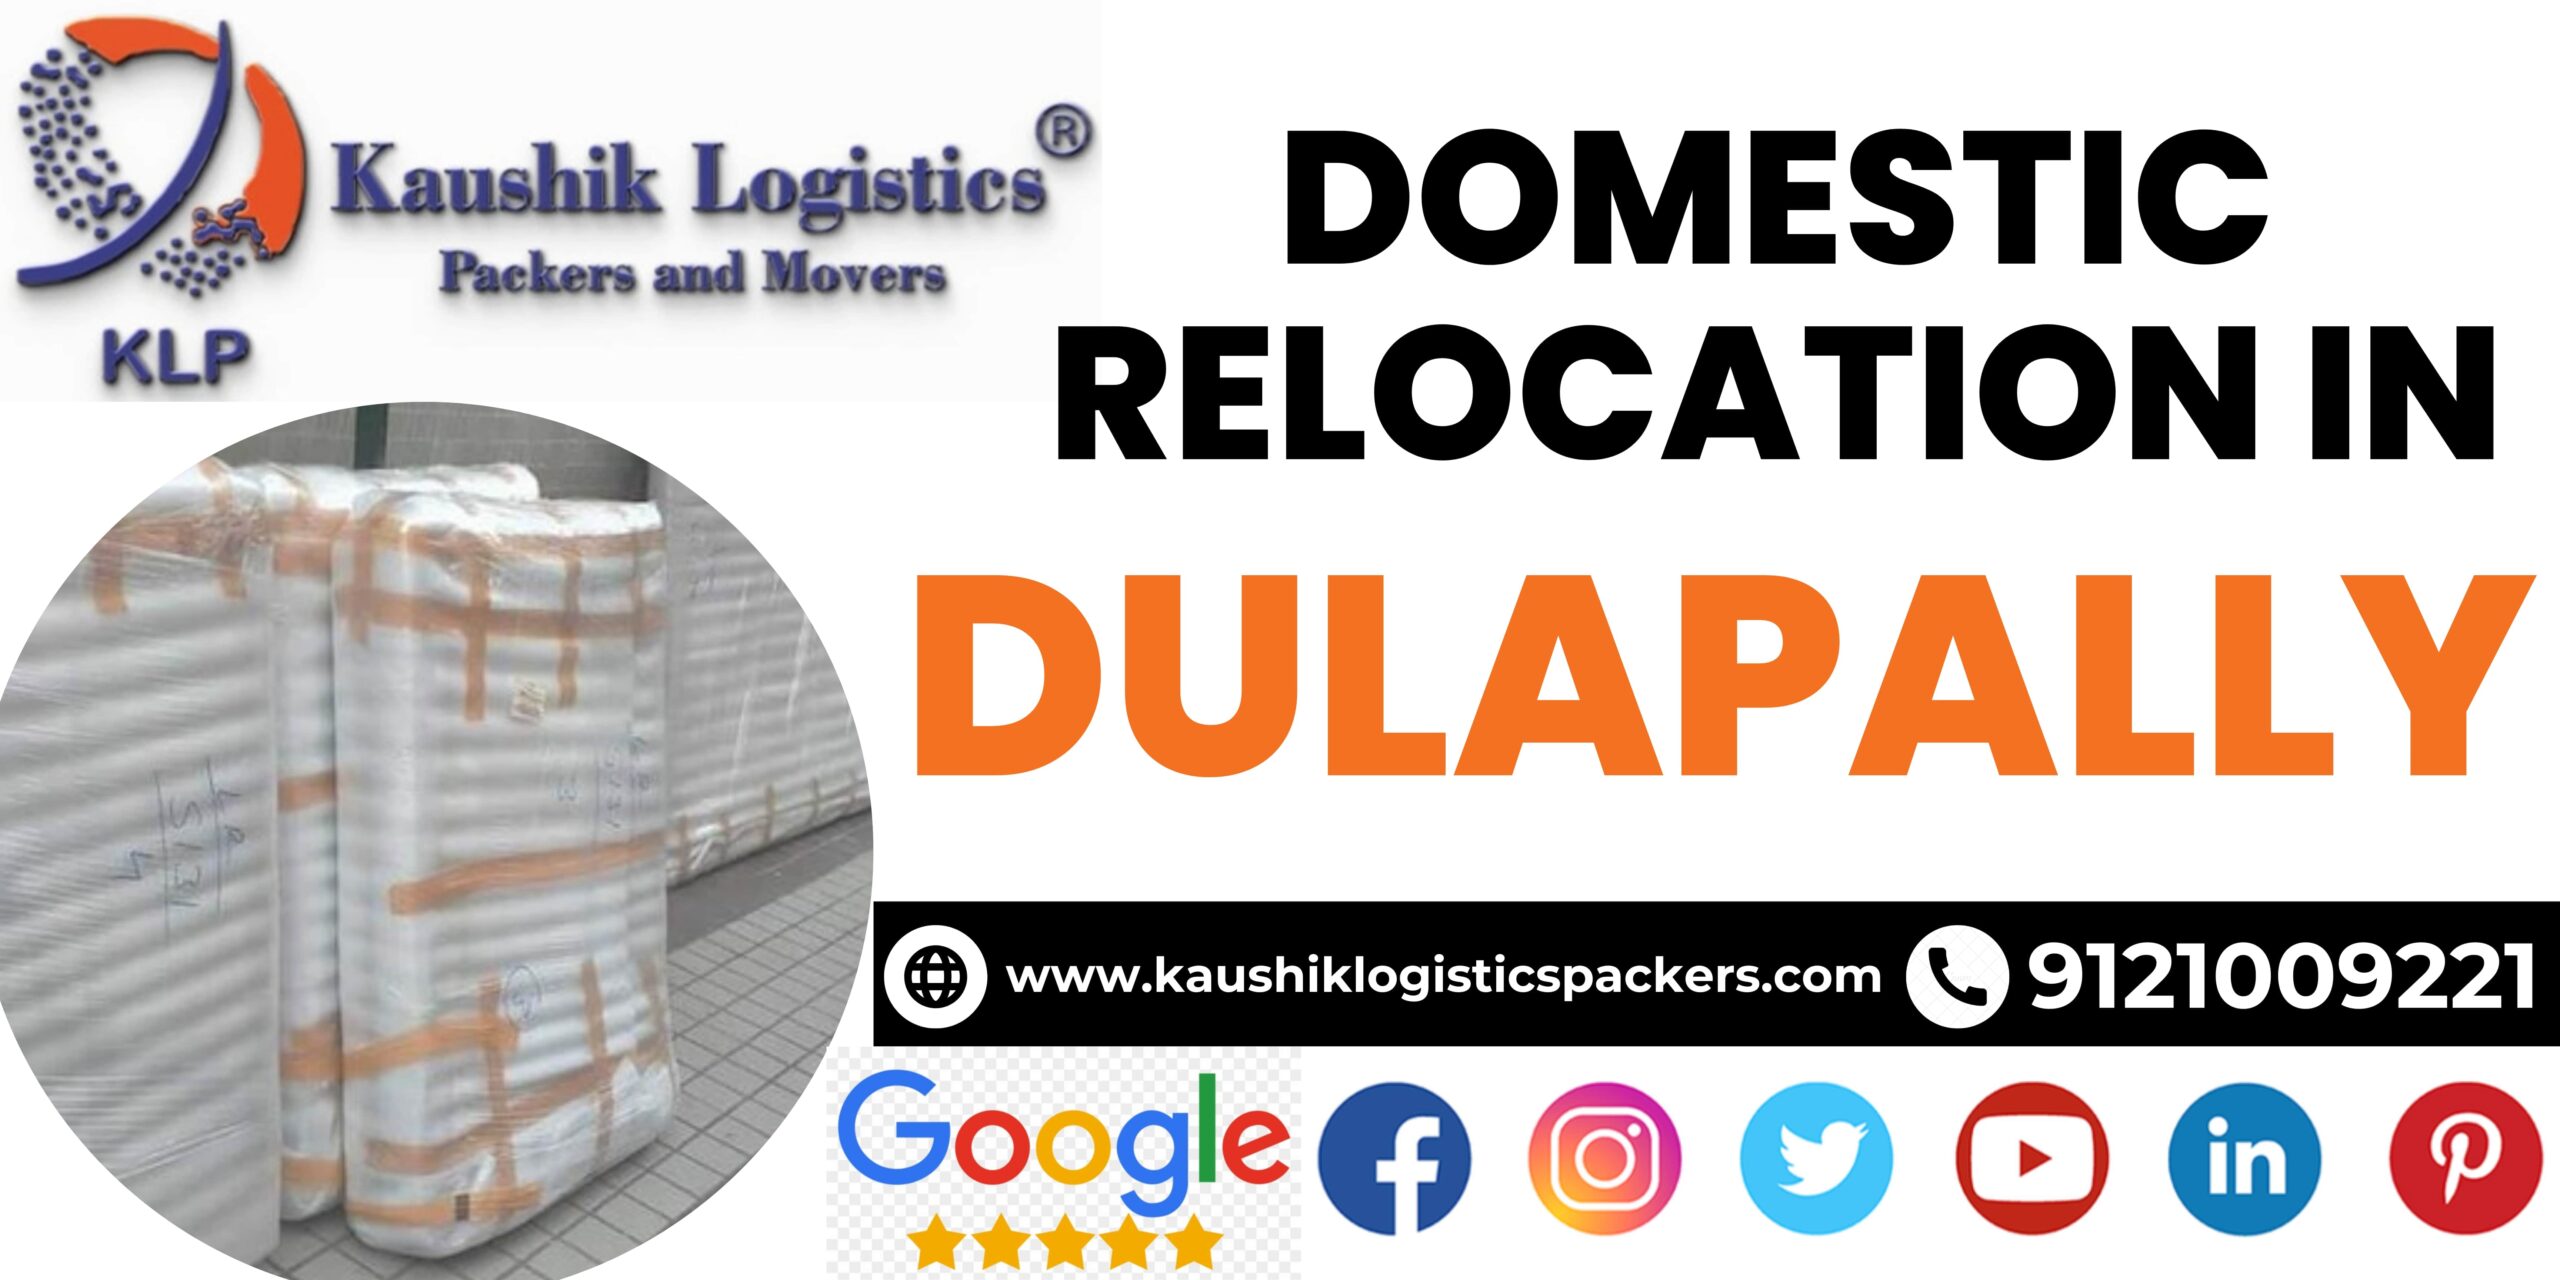 Packers and Movers In Dulapally